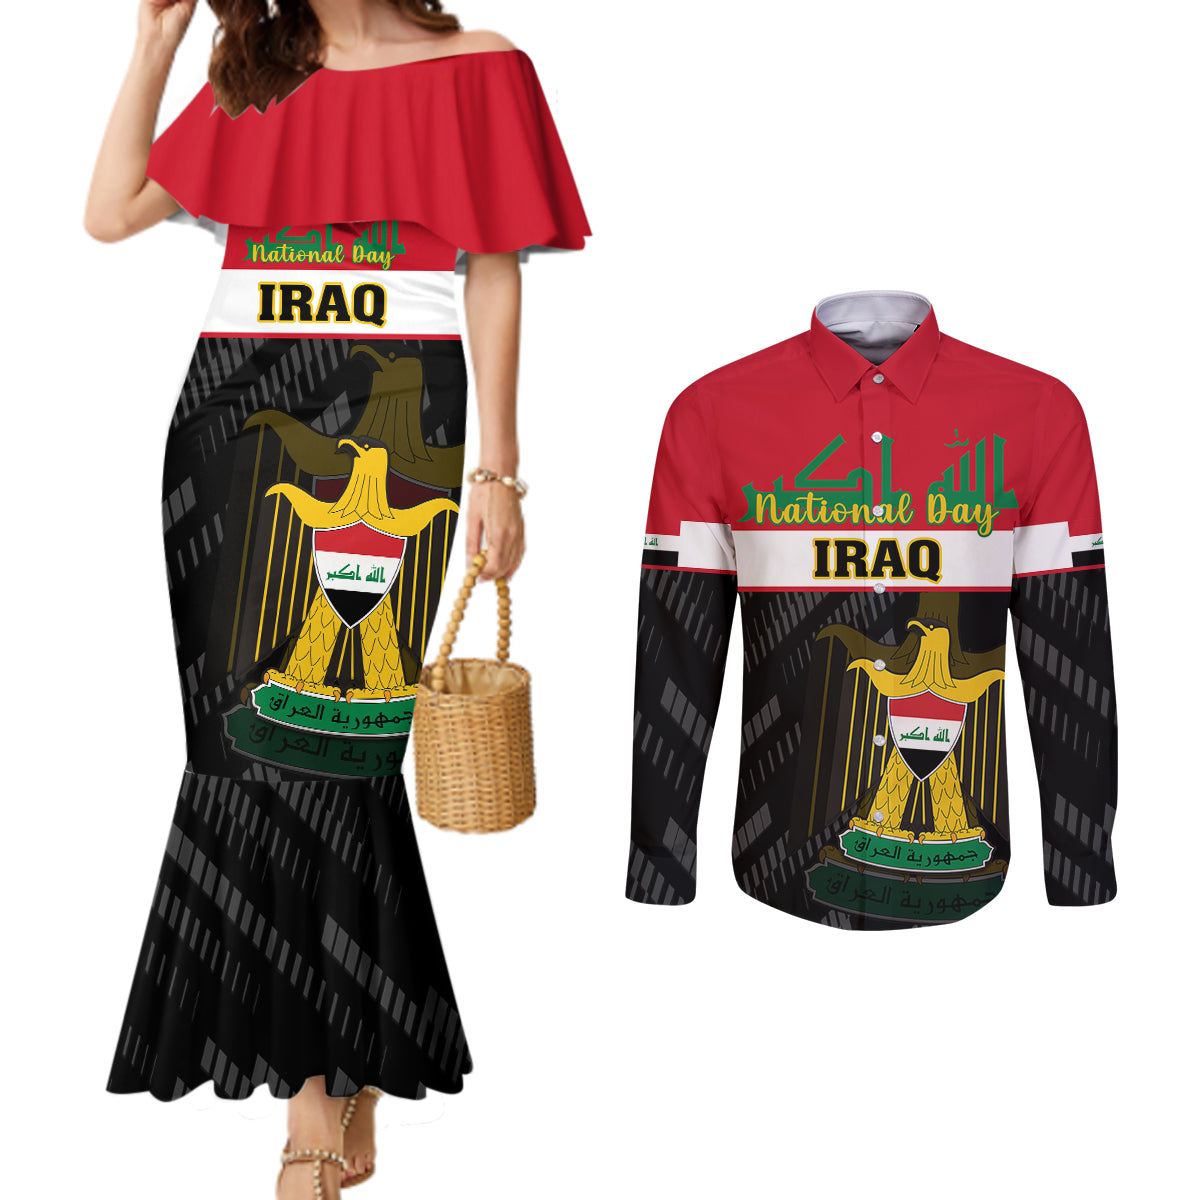 iraq-national-day-couples-matching-mermaid-dress-and-long-sleeve-button-shirts-iraqi-coat-of-arms-with-flag-style